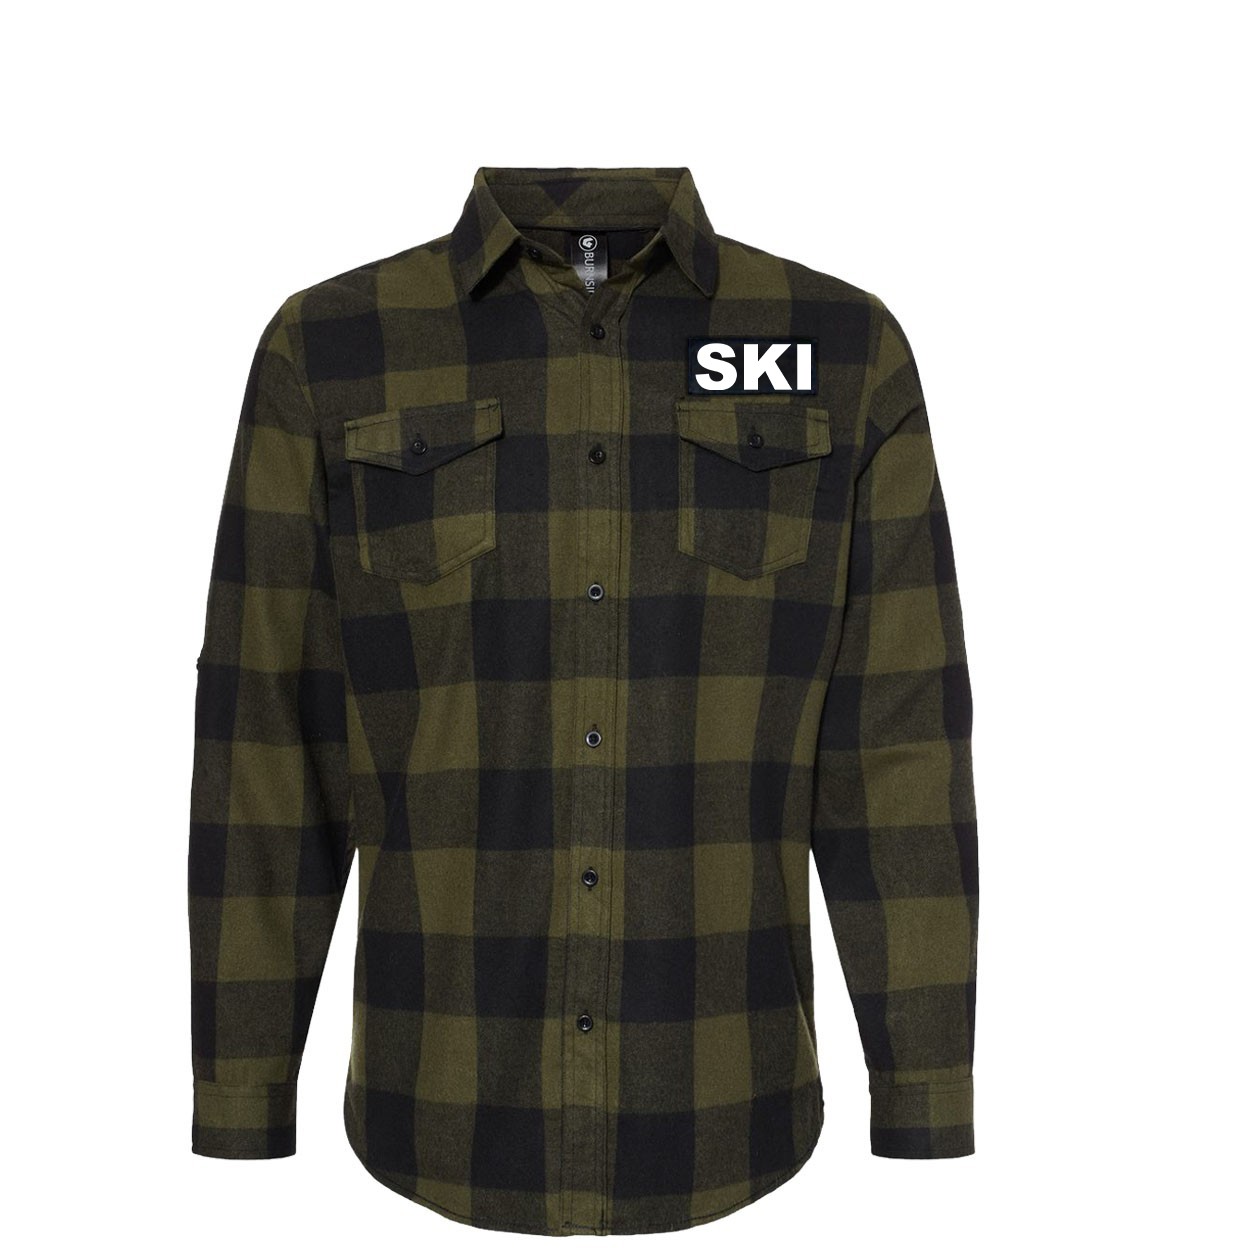 Ski Brand Logo Night Out Rectangle Woven Patch Flannel Shirt Long Sleeve Army/Black